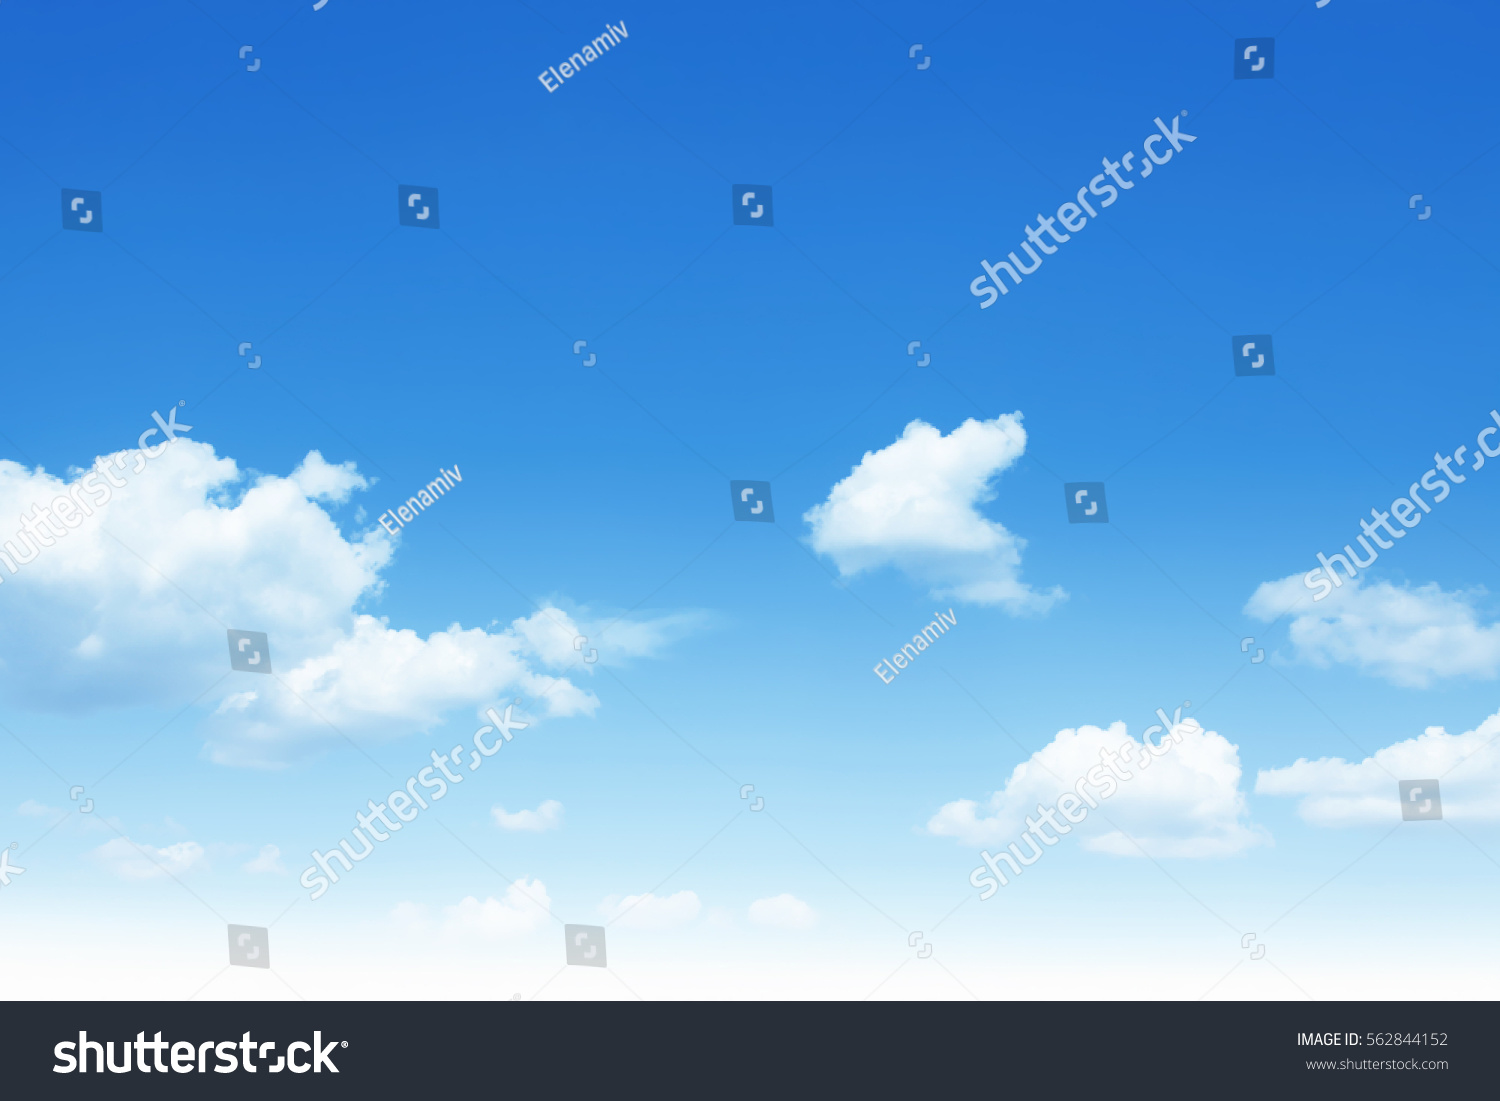 Blue sky with white clouds. #562844152